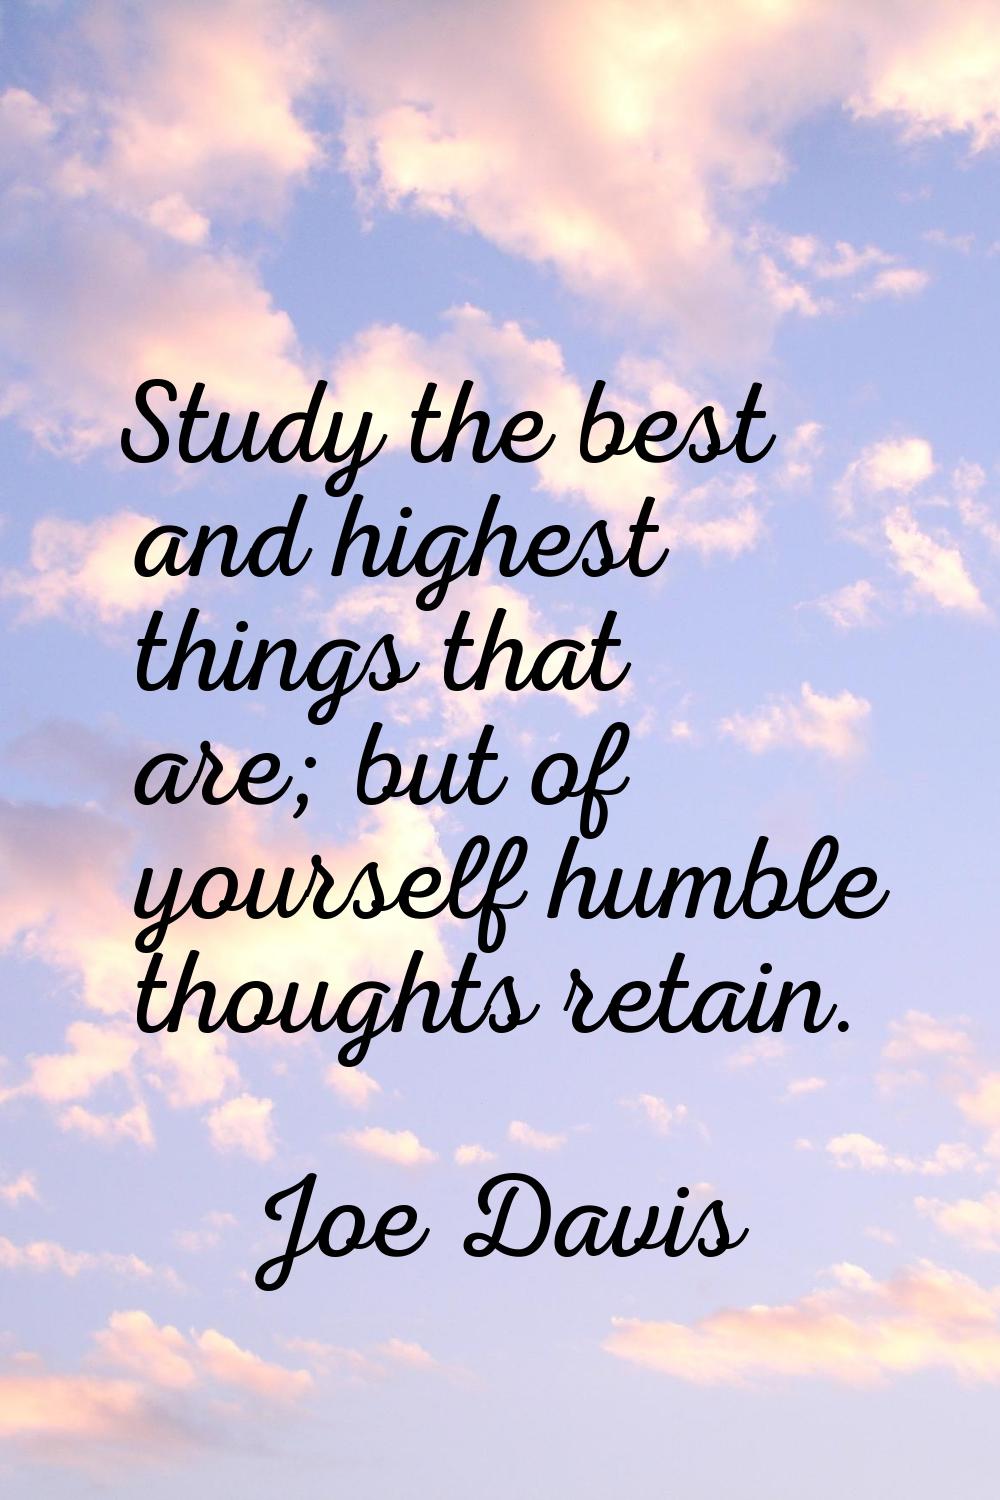 Study the best and highest things that are; but of yourself humble thoughts retain.